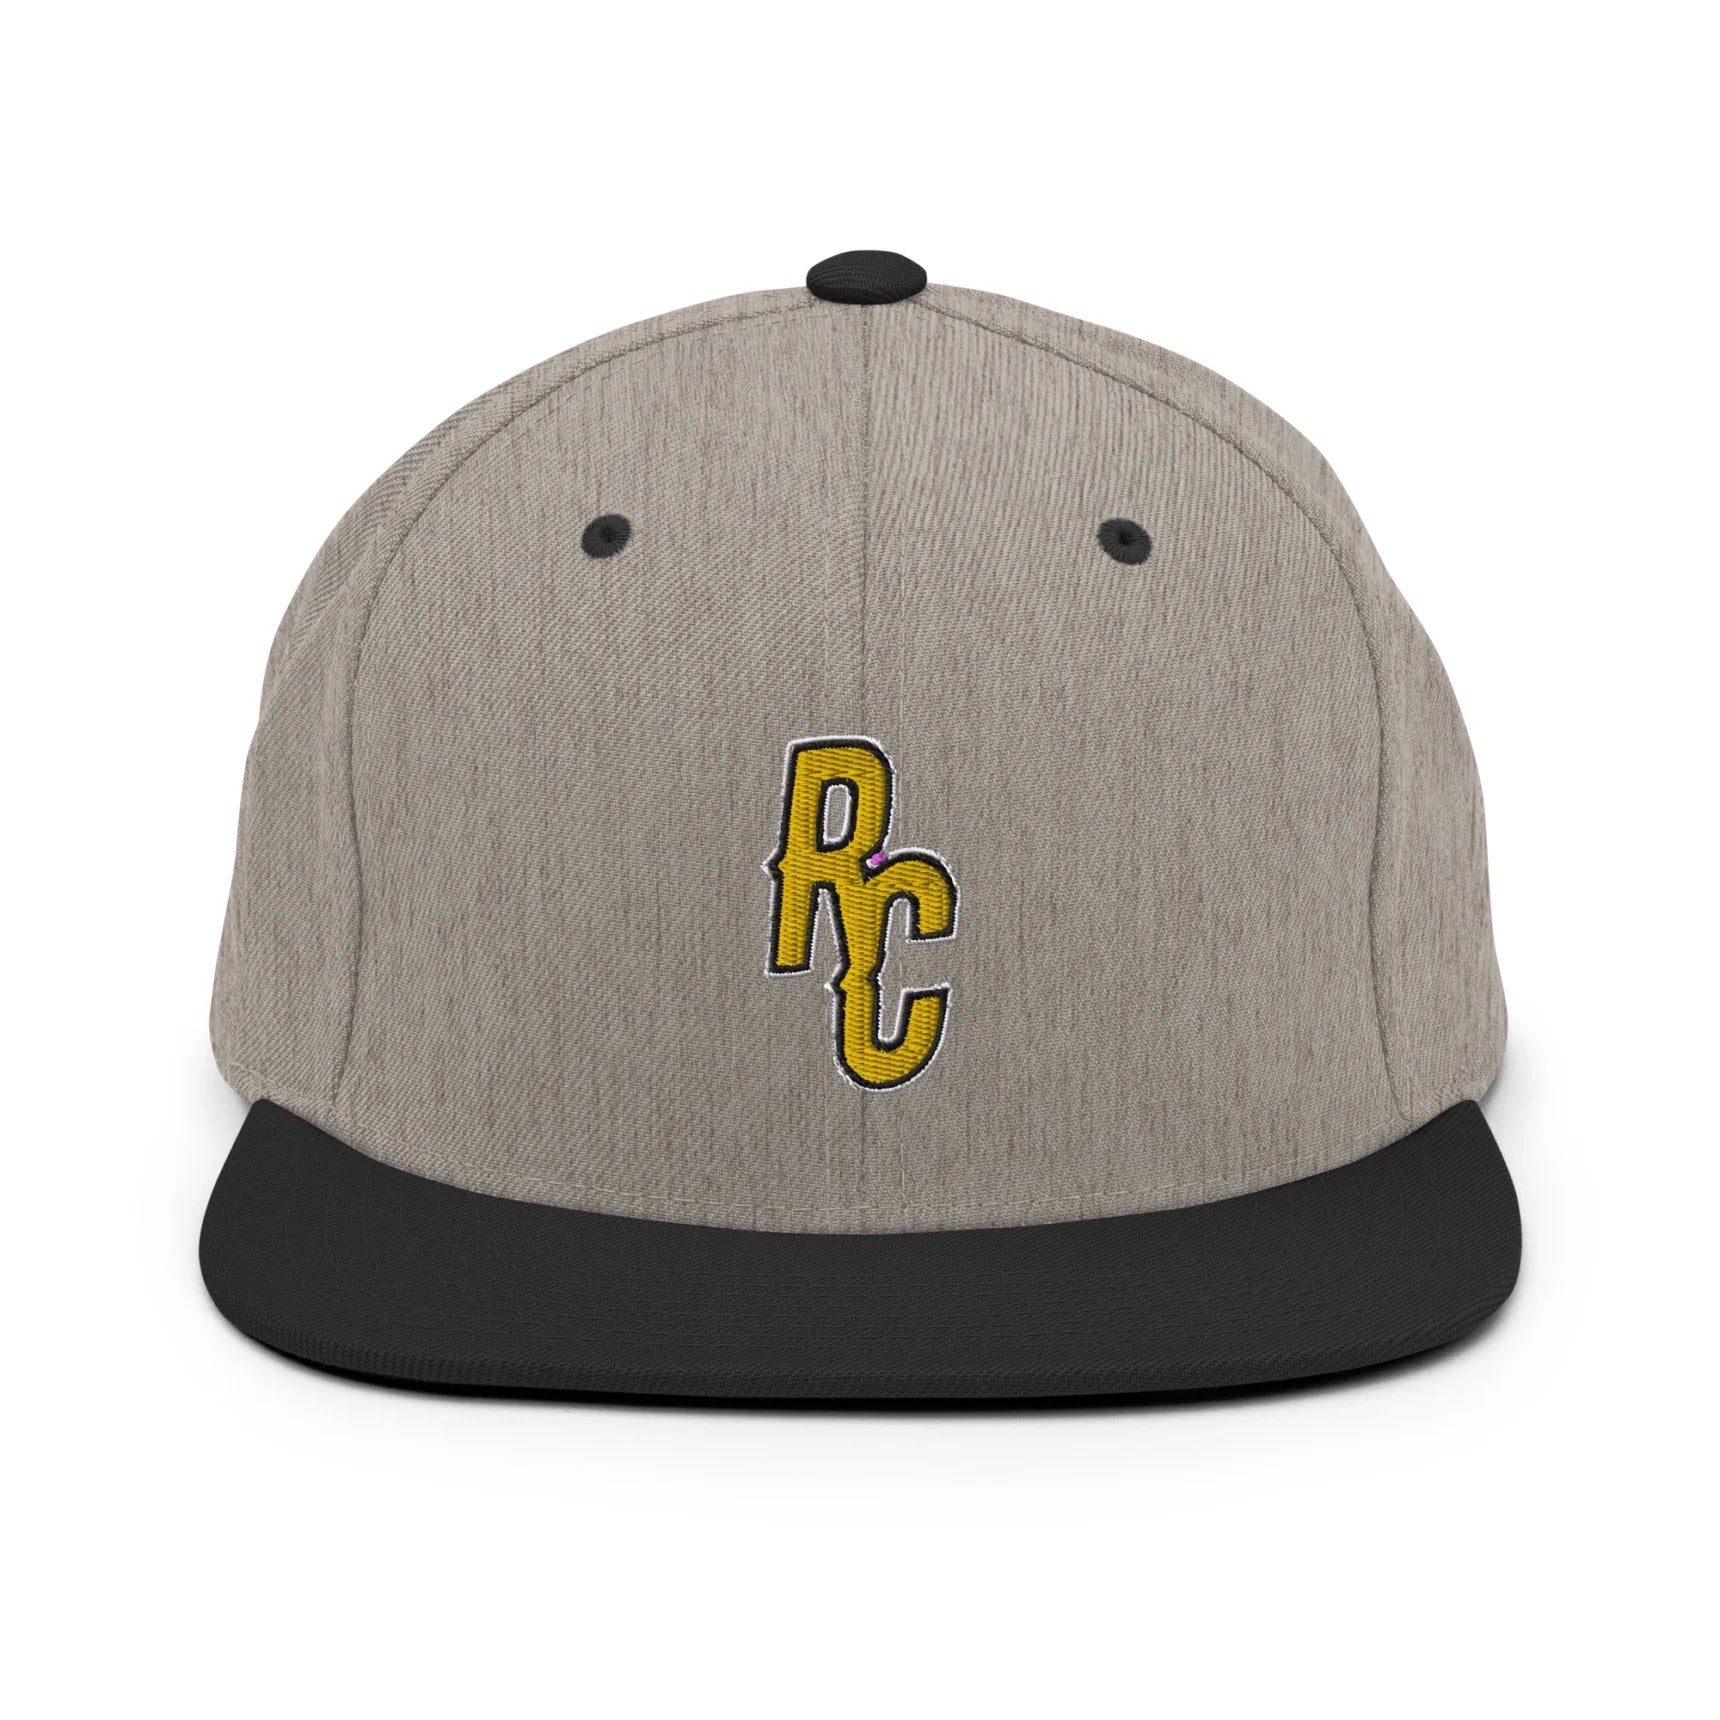 Ray Cheesy ShowZone snapback hat in heather grey with black brim and accents